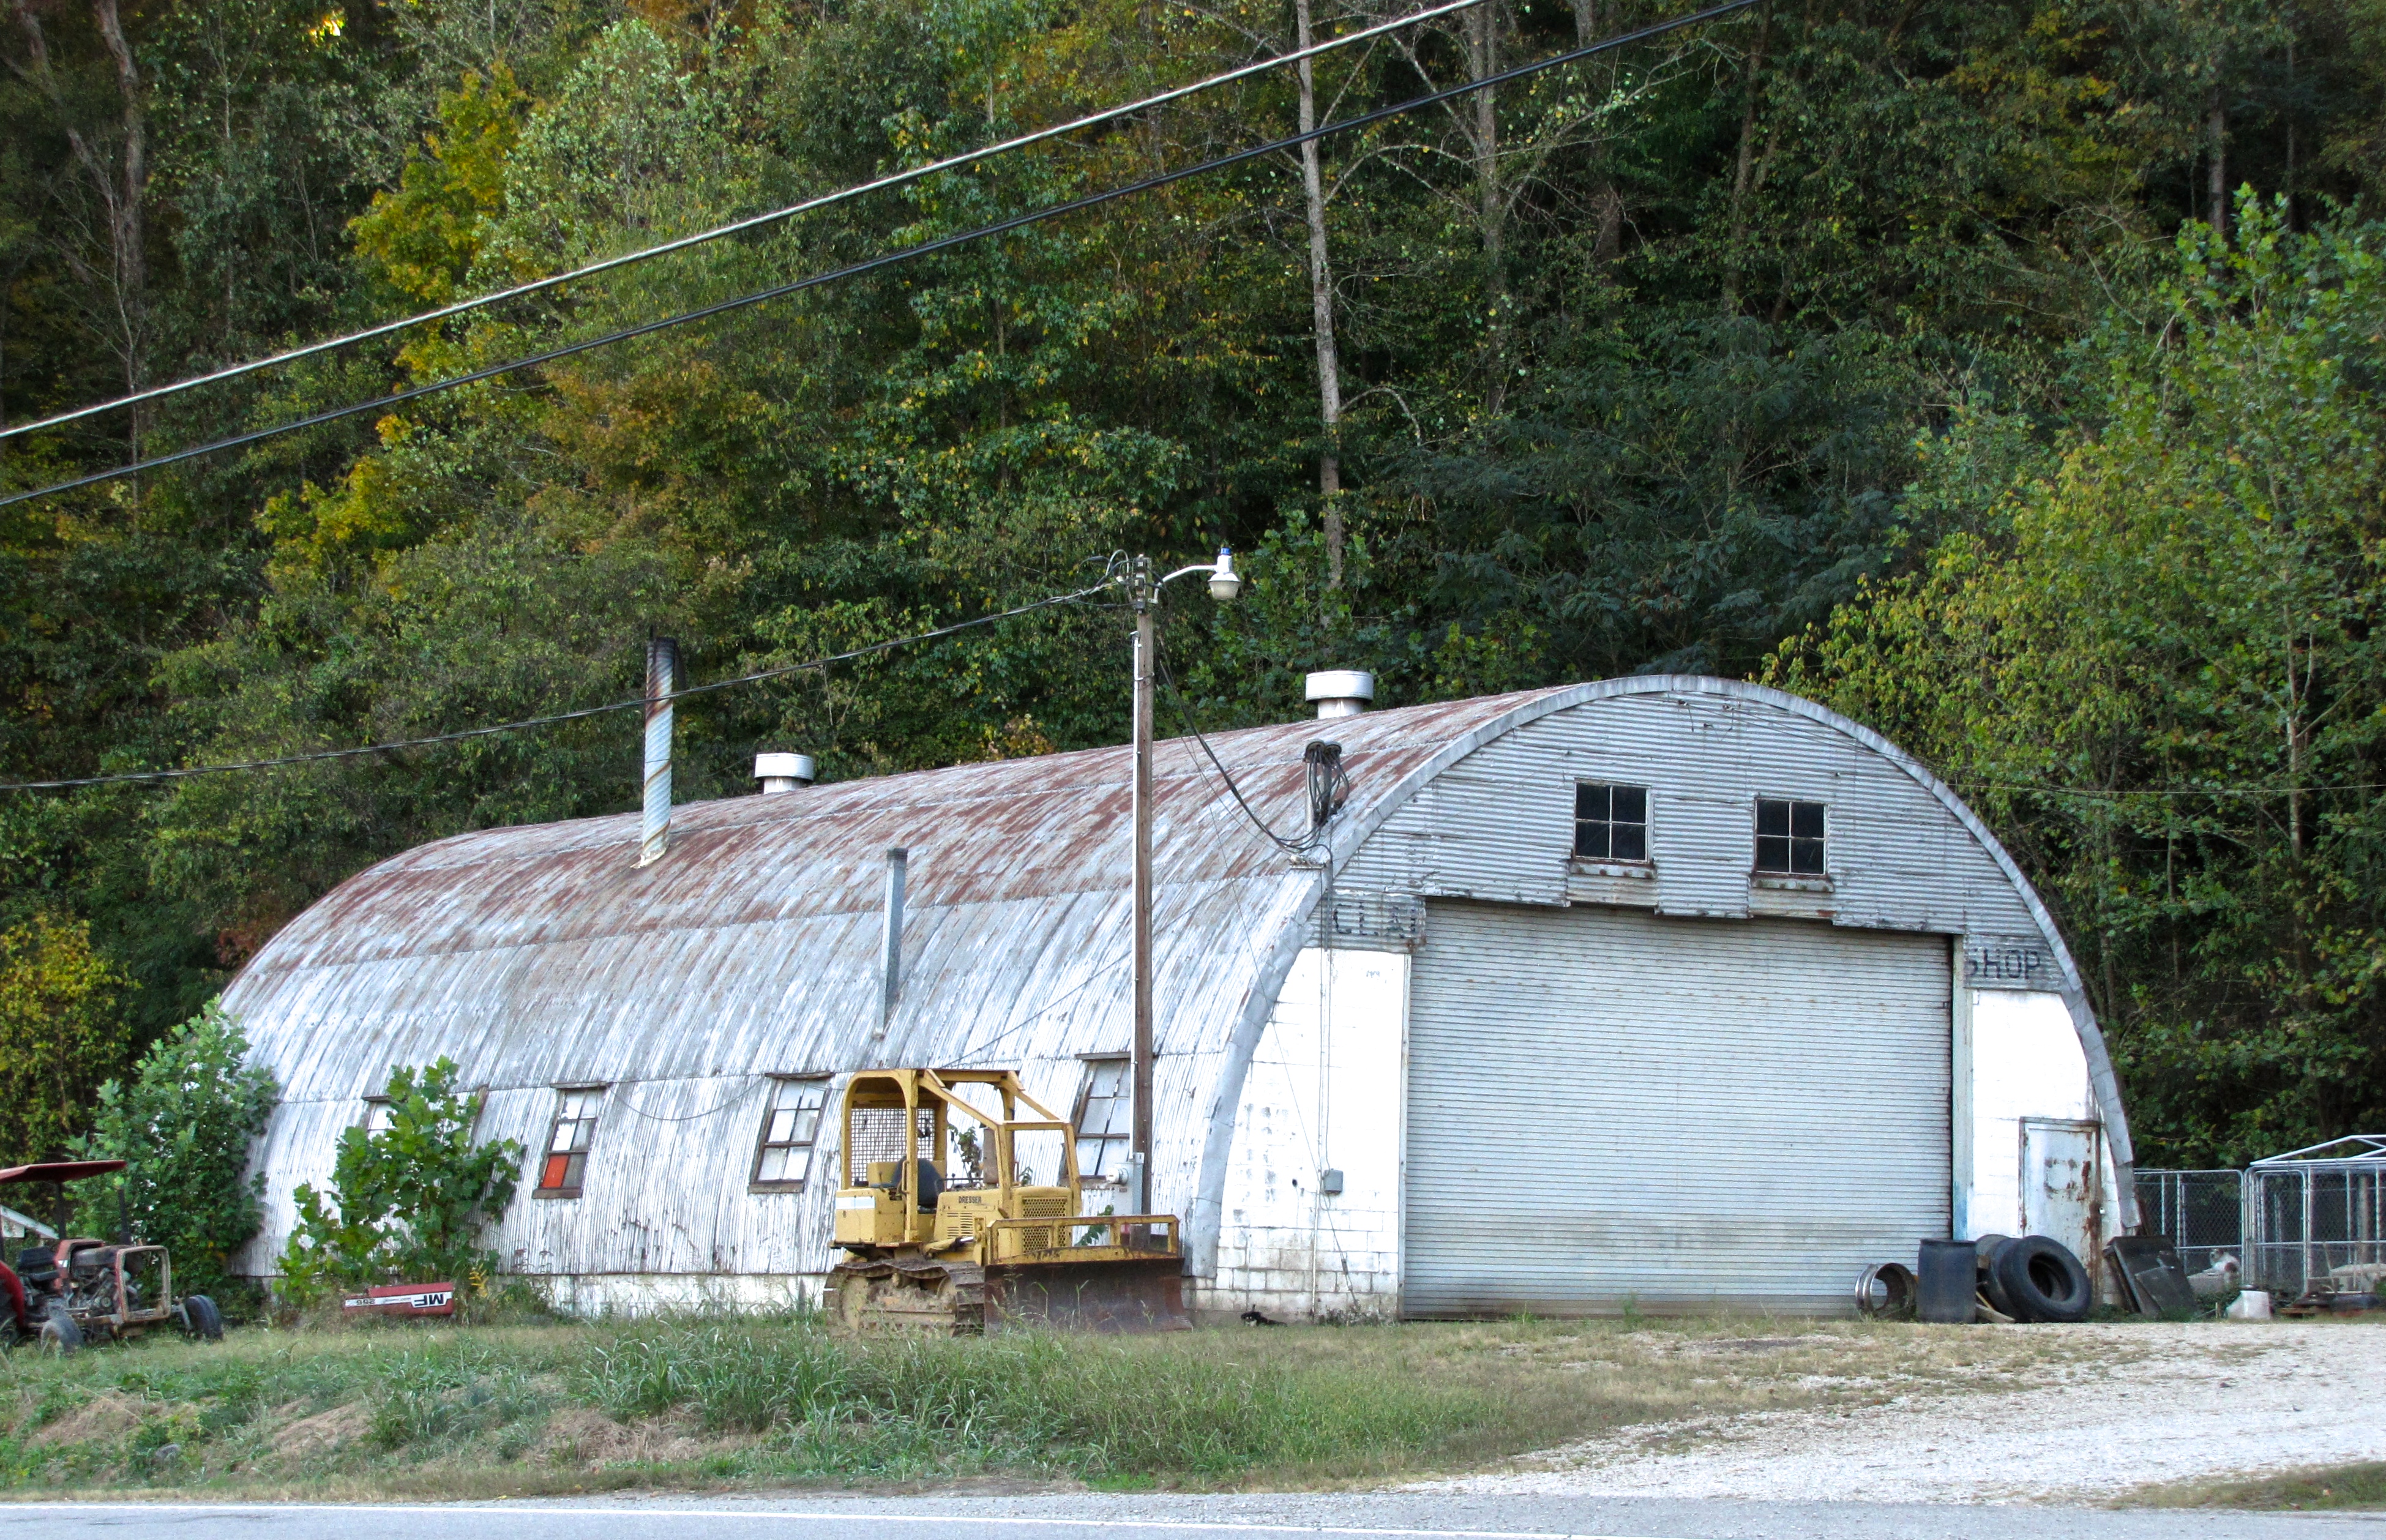 quonset hut in Janesville, WI